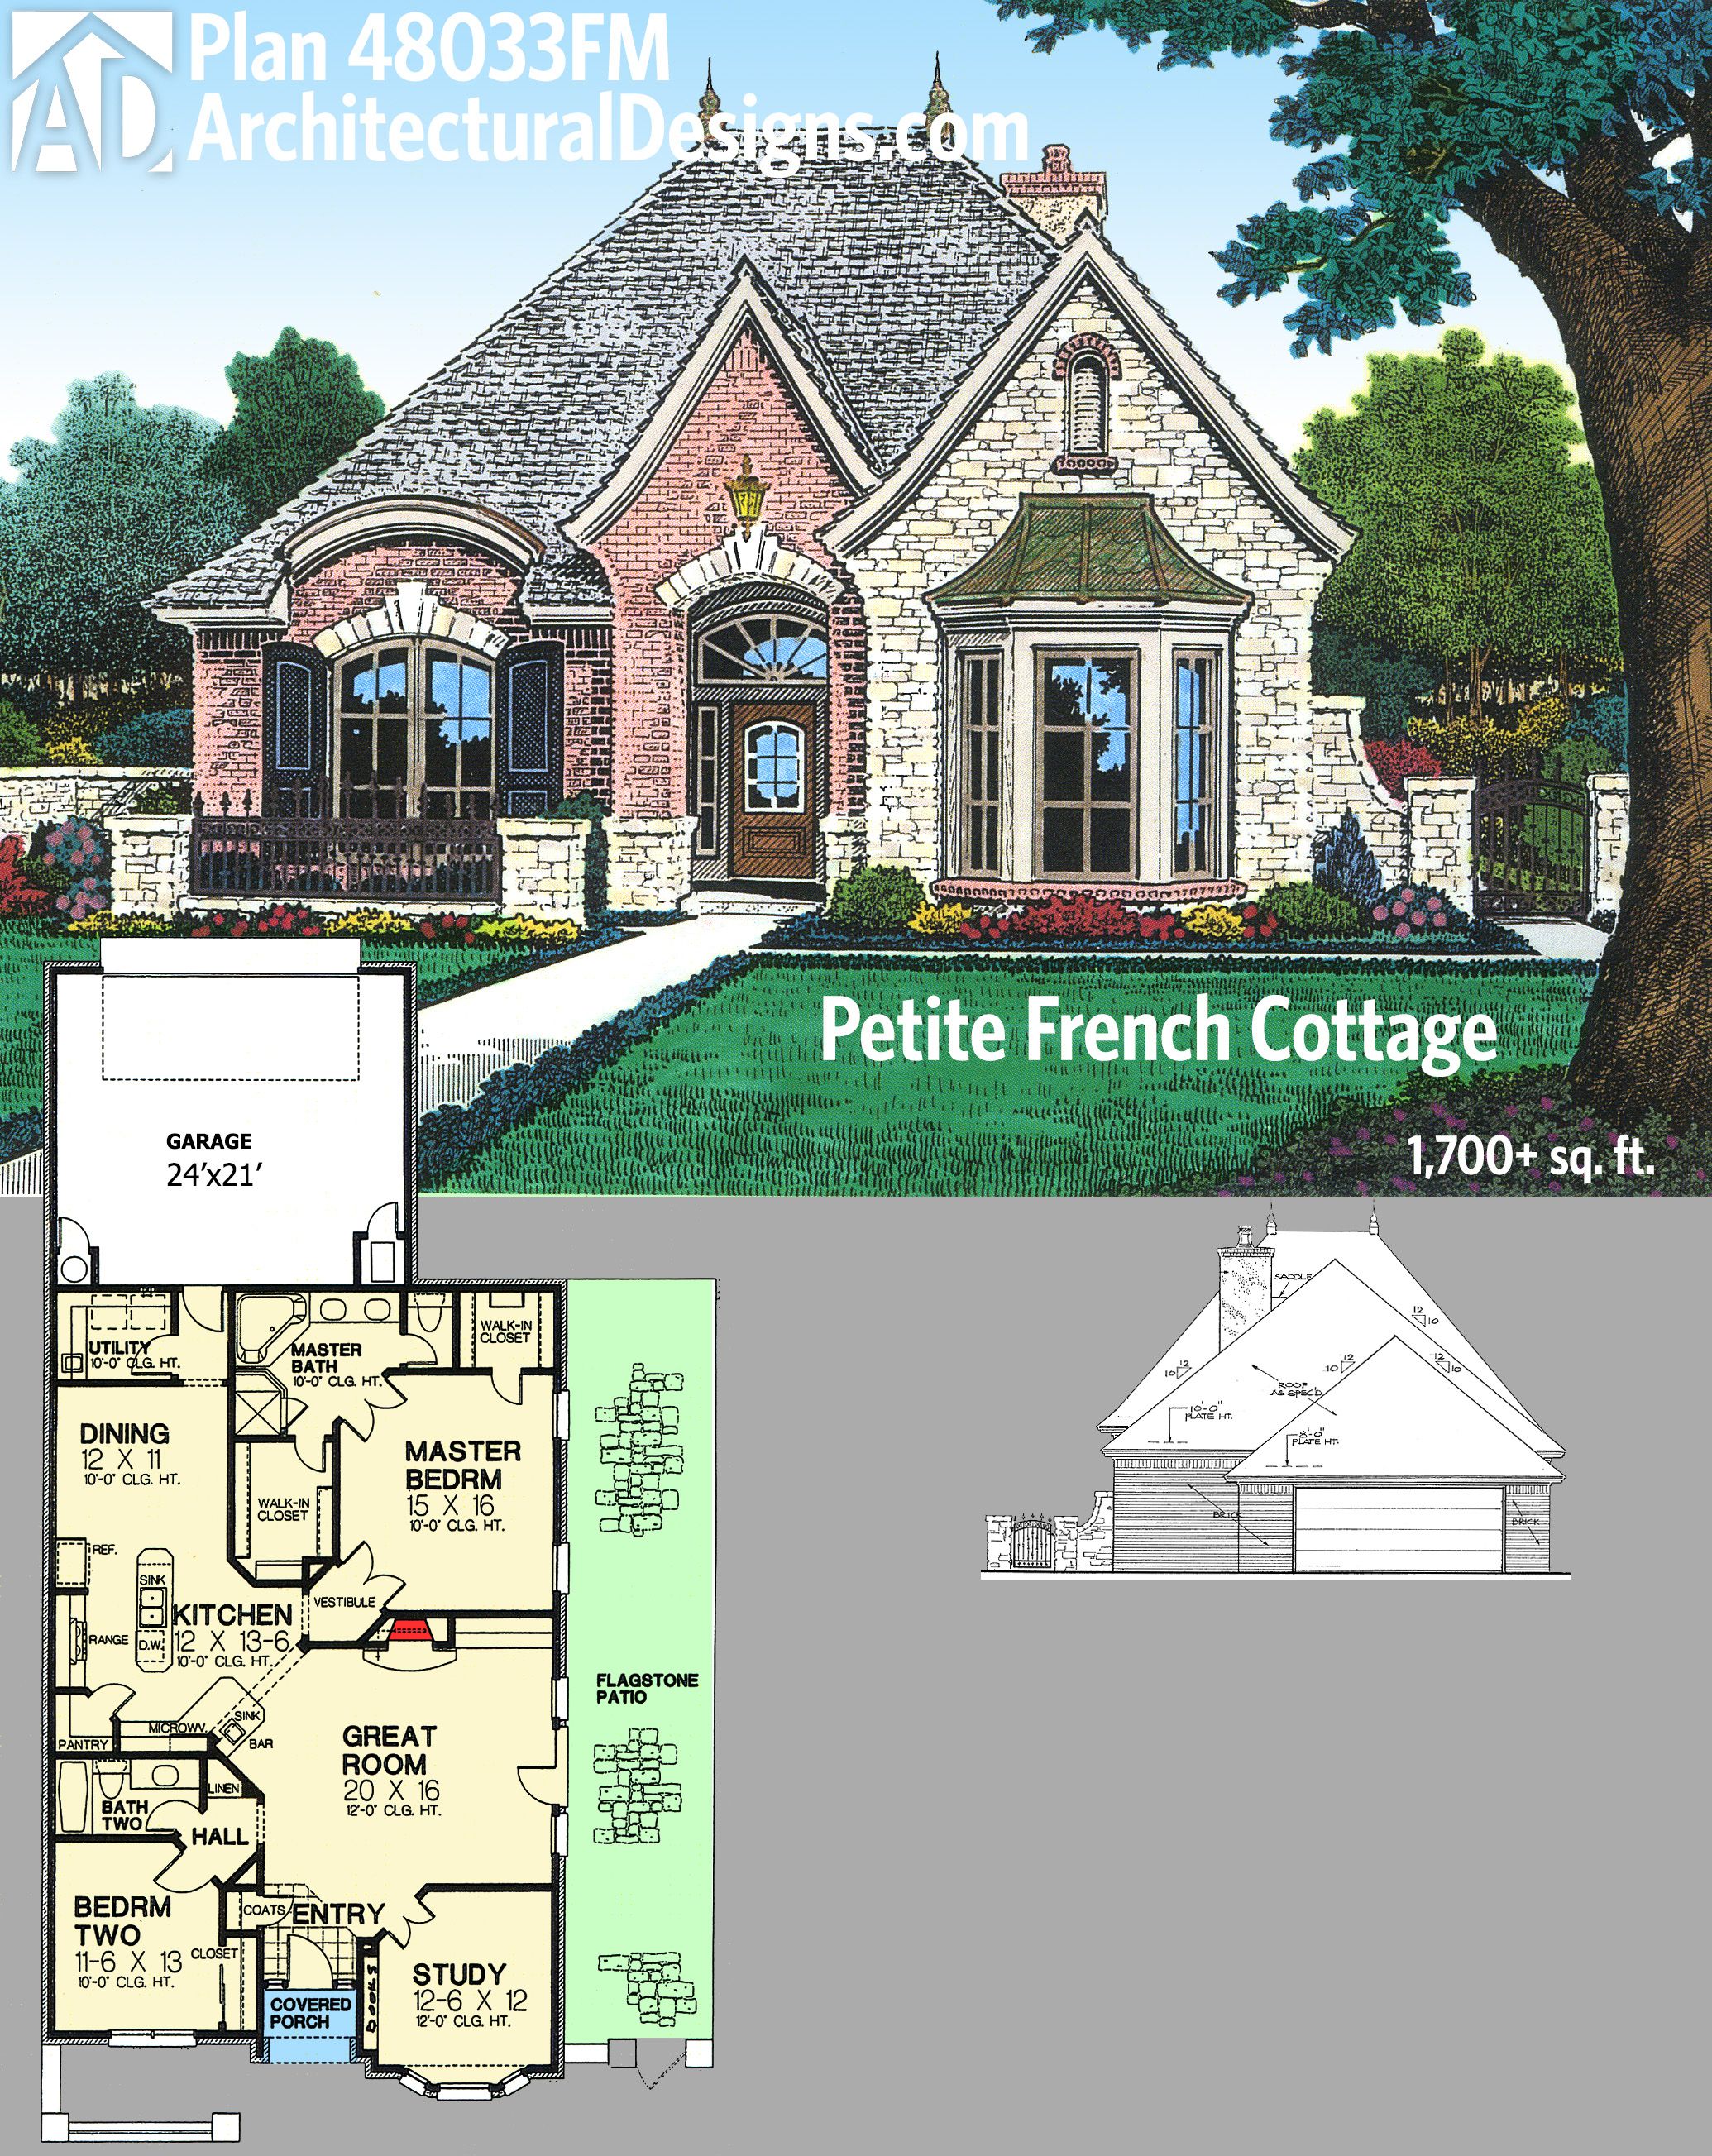 Plan 48033FM Petite French Cottage Country cottage